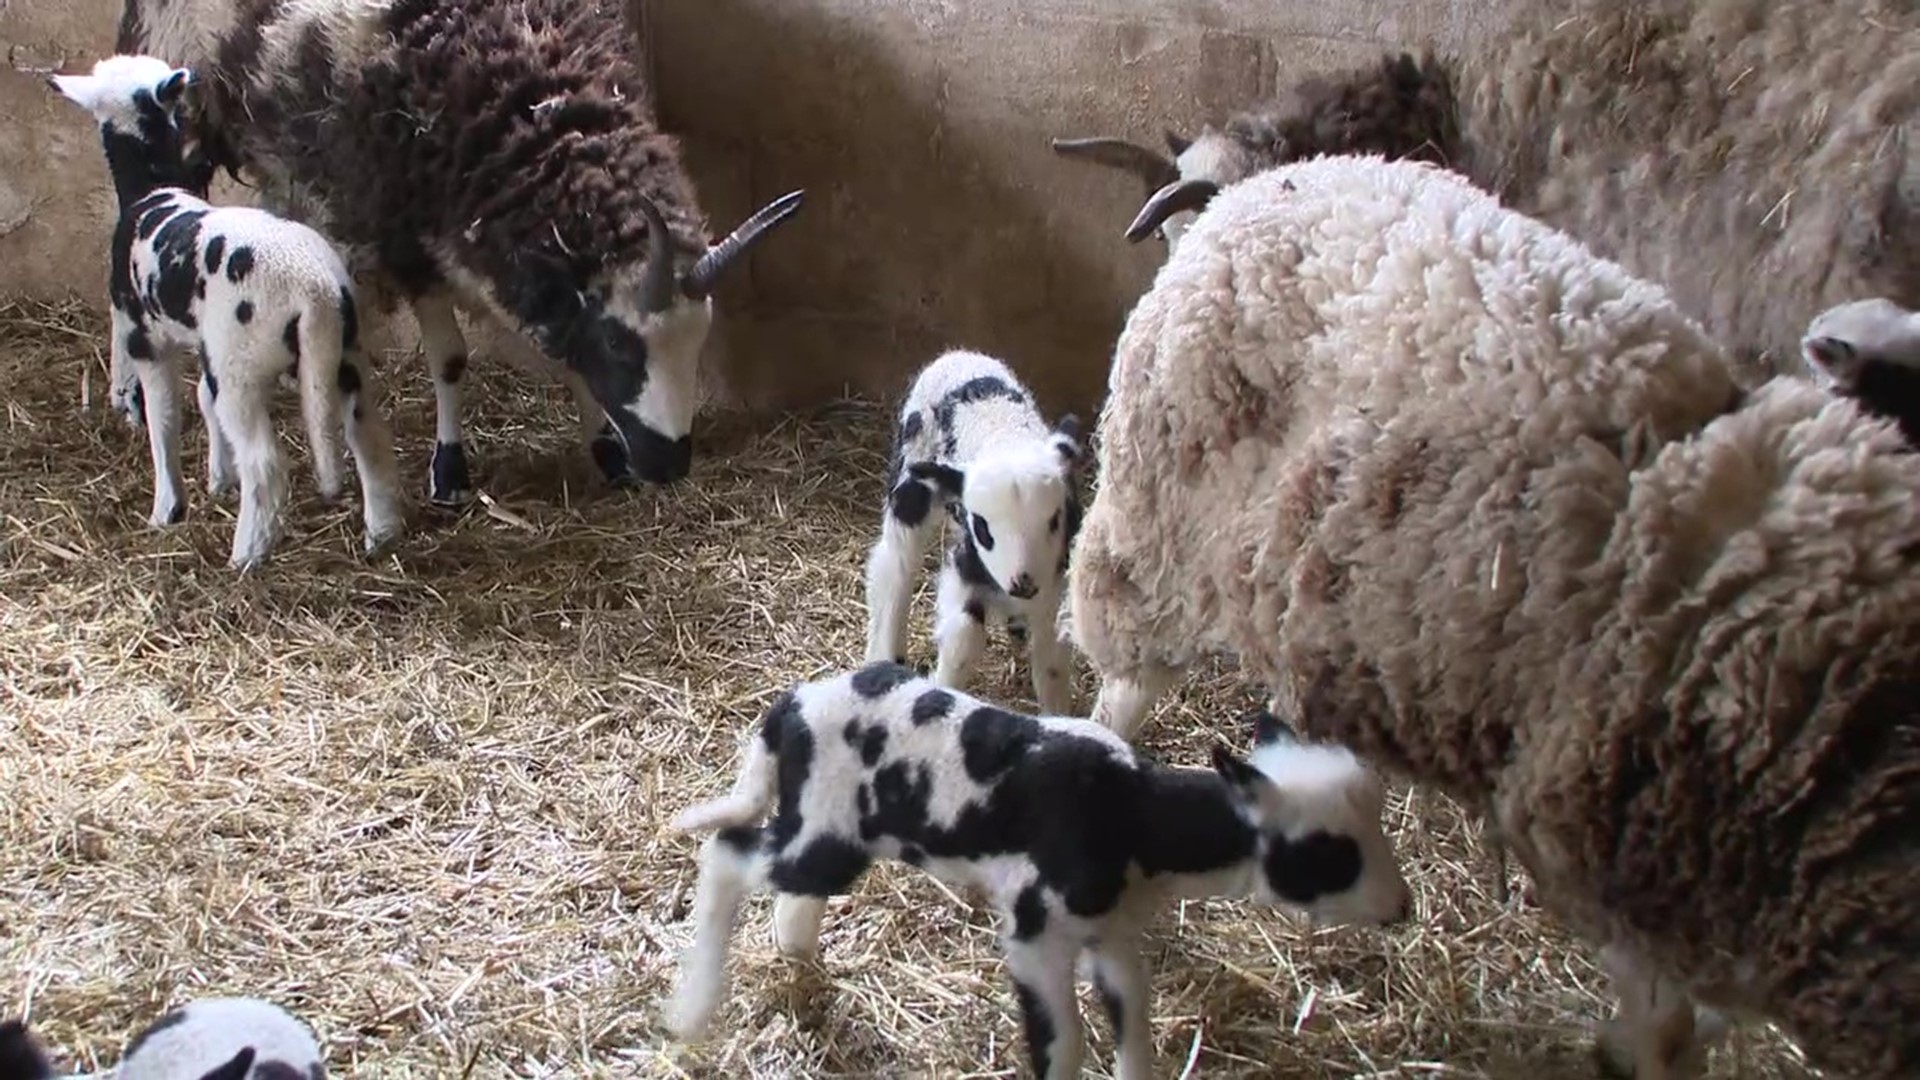 It's lambing season when most lambs are born. Newswatch 16's Nikki Krize stopped by to see the little ones.